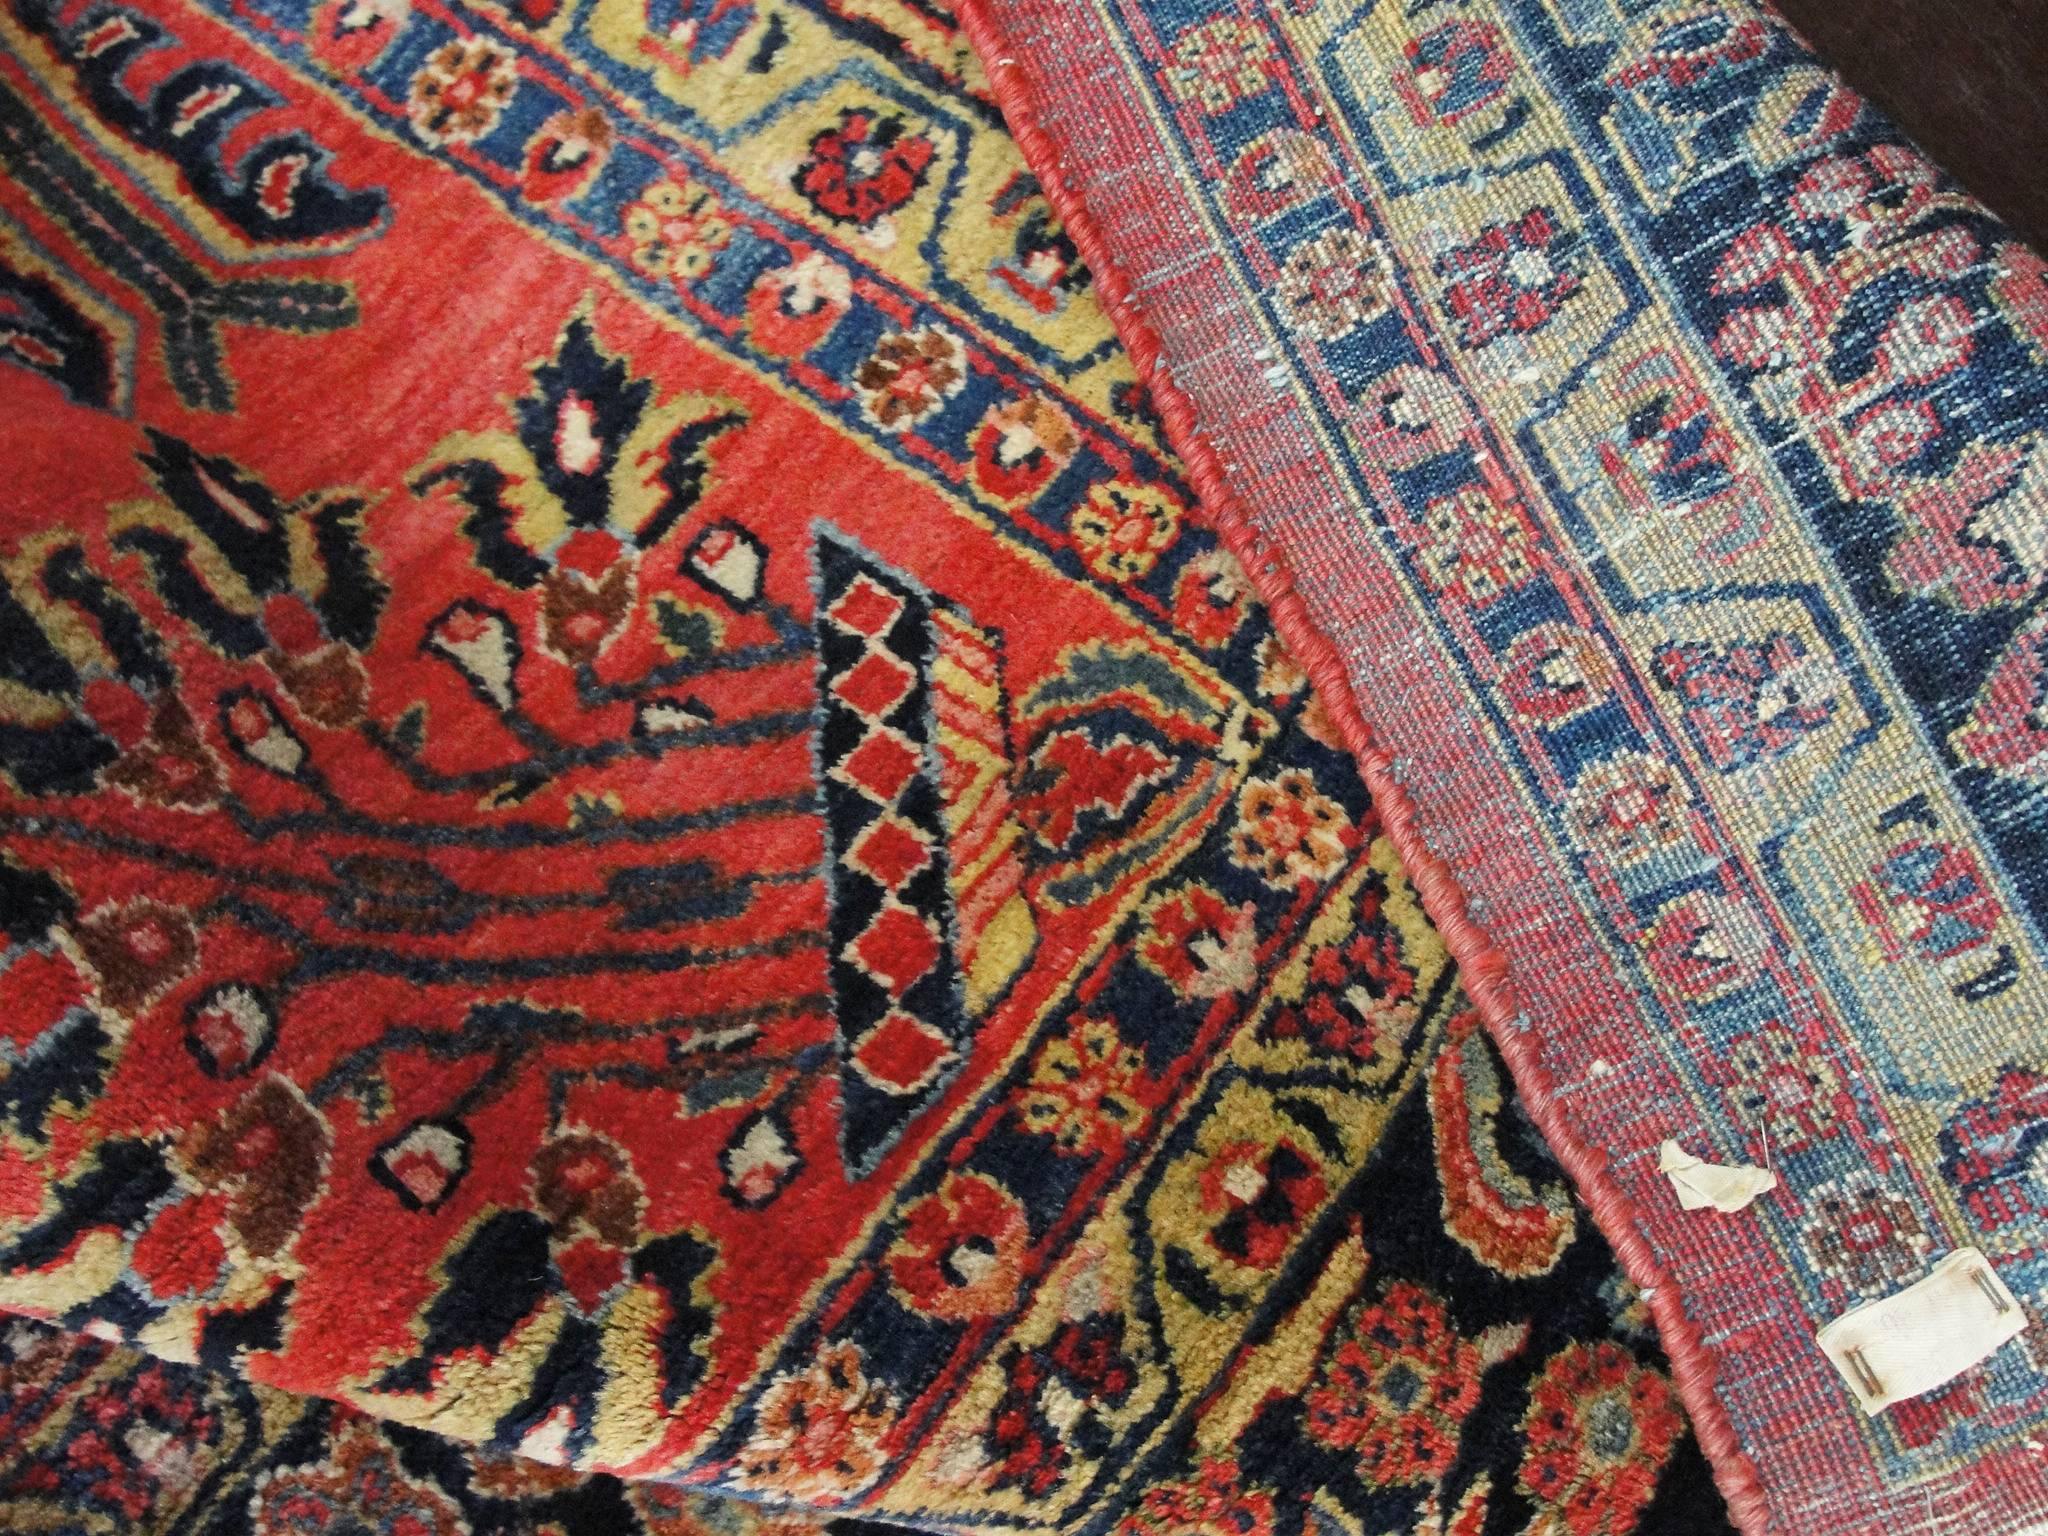 The source of this important provenance has been in the village of Sarouk. North of Arak (formerly Sultanabad). Sarouks are known to be of high quality. The pile is usually higher than the average Persian rug and therefore Sarouks are rather heavy